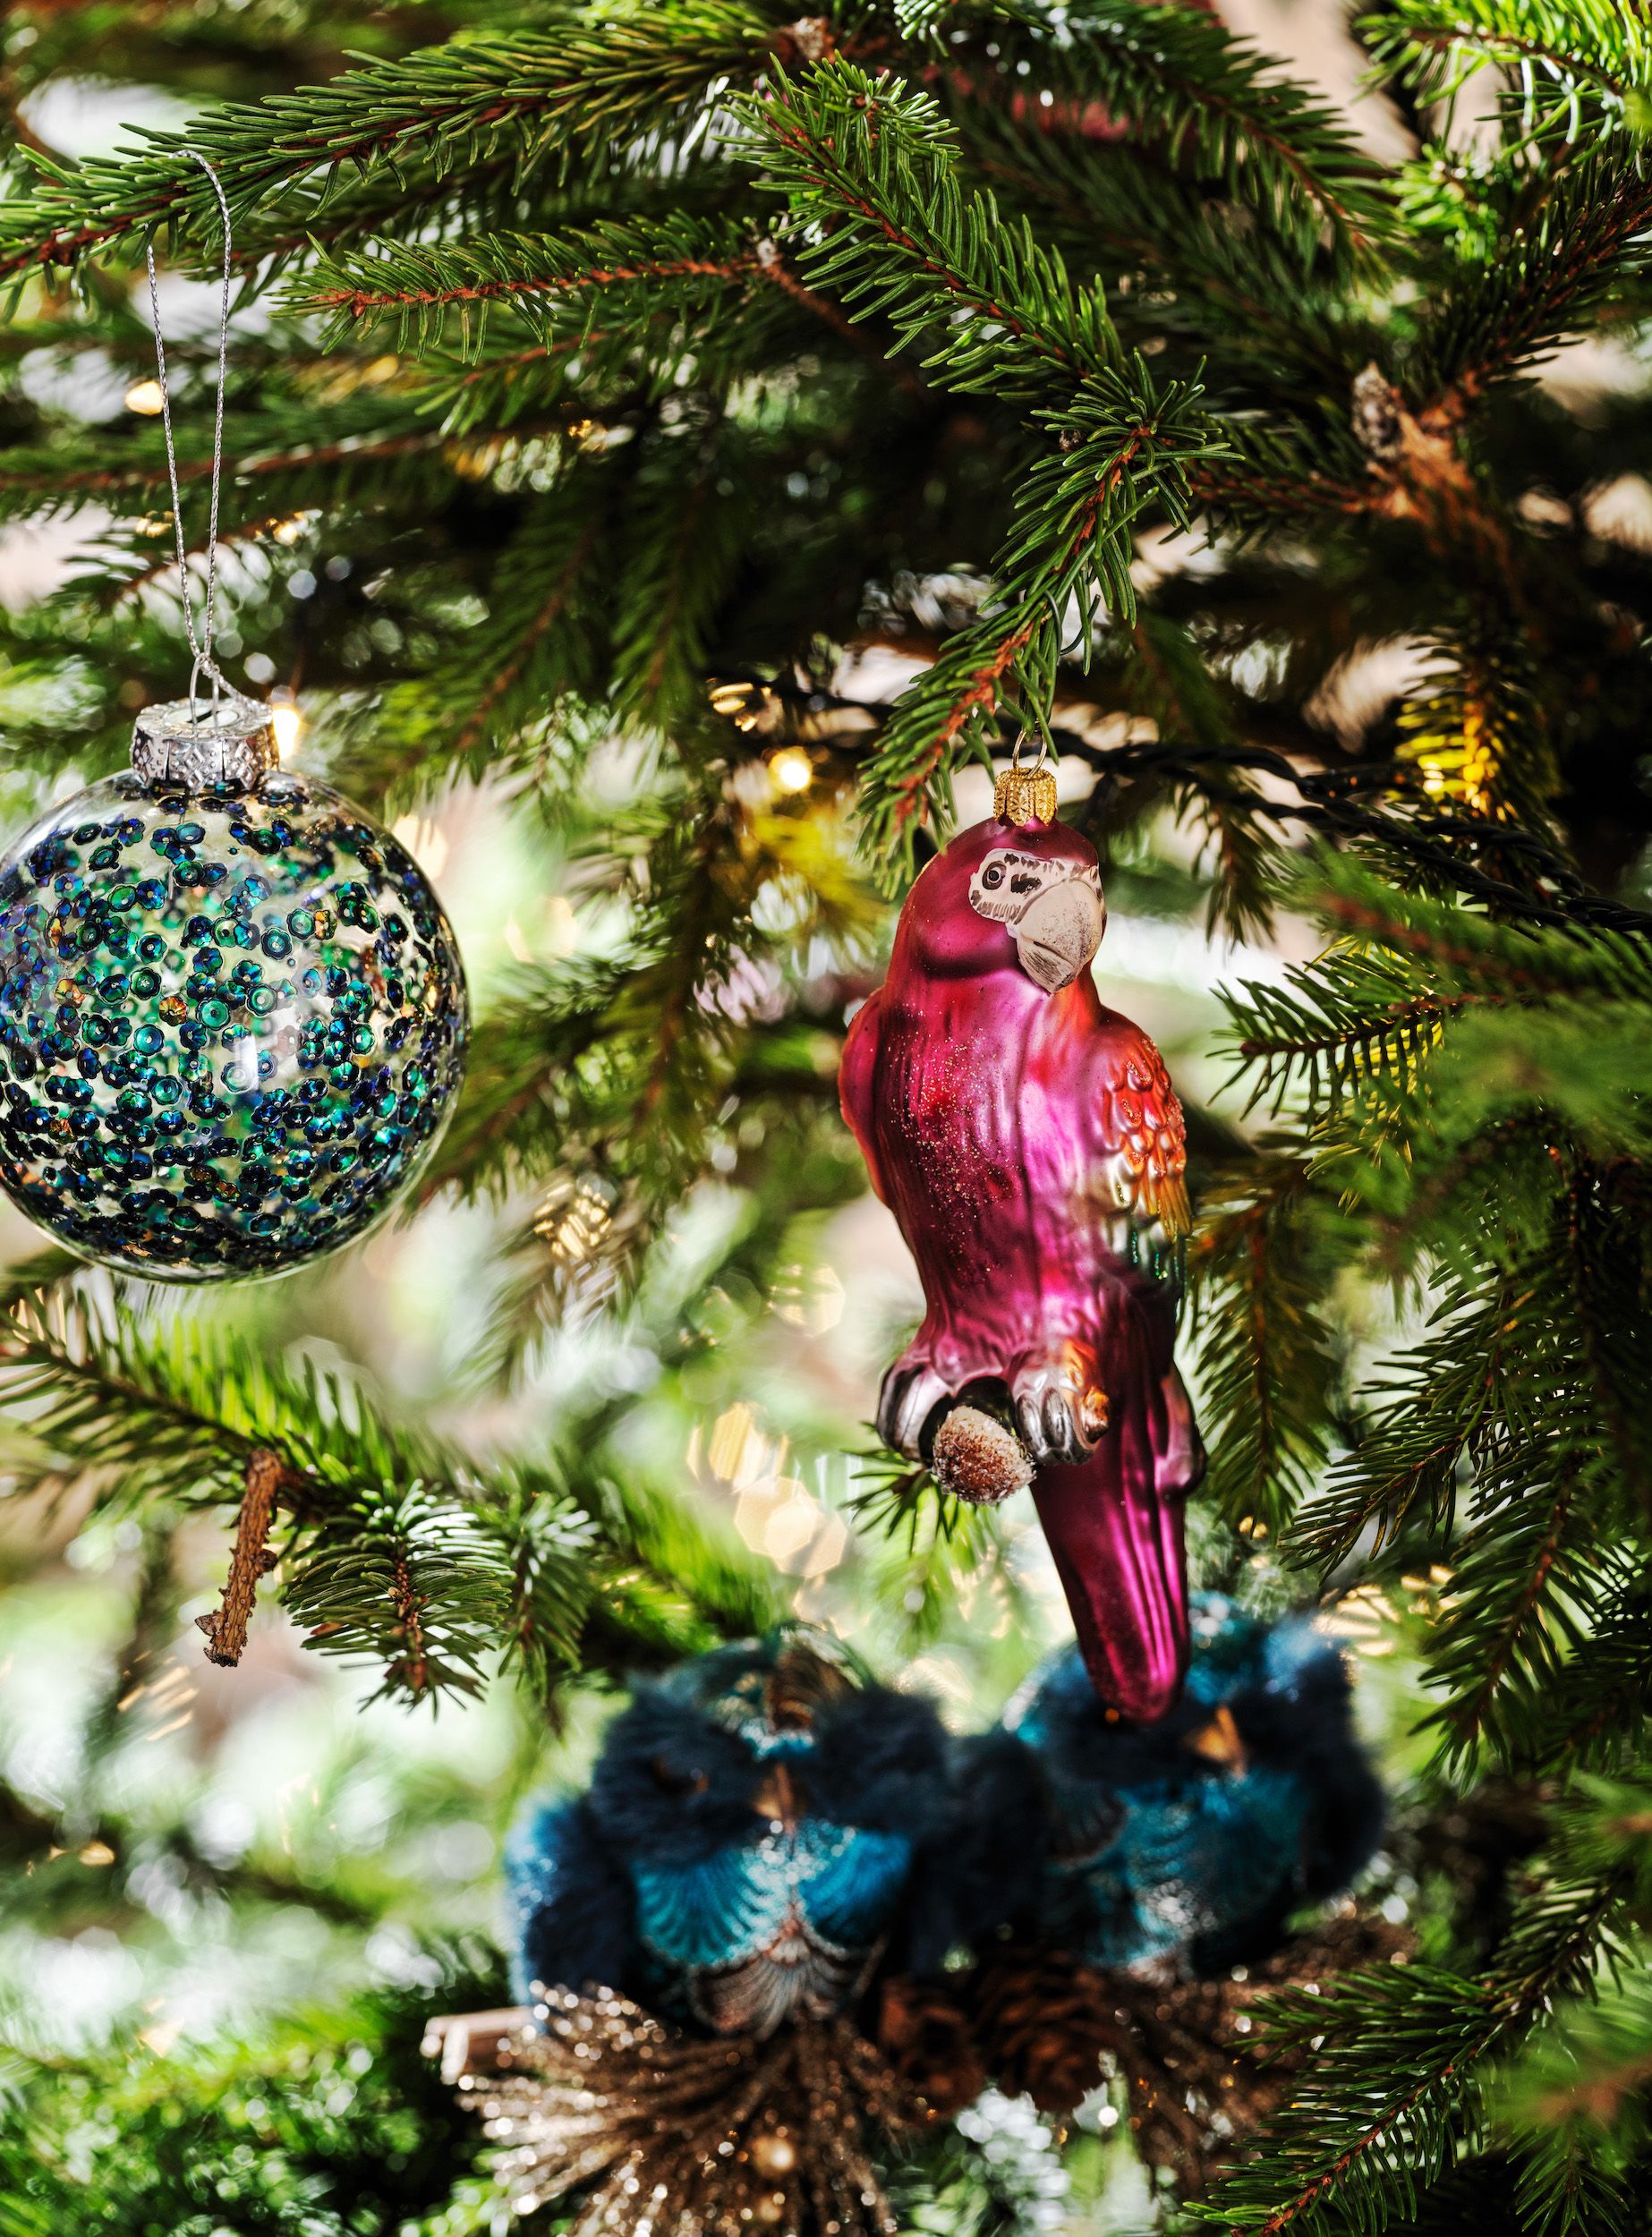 What Your Christmas Tree Theme Reveals About Your Personality